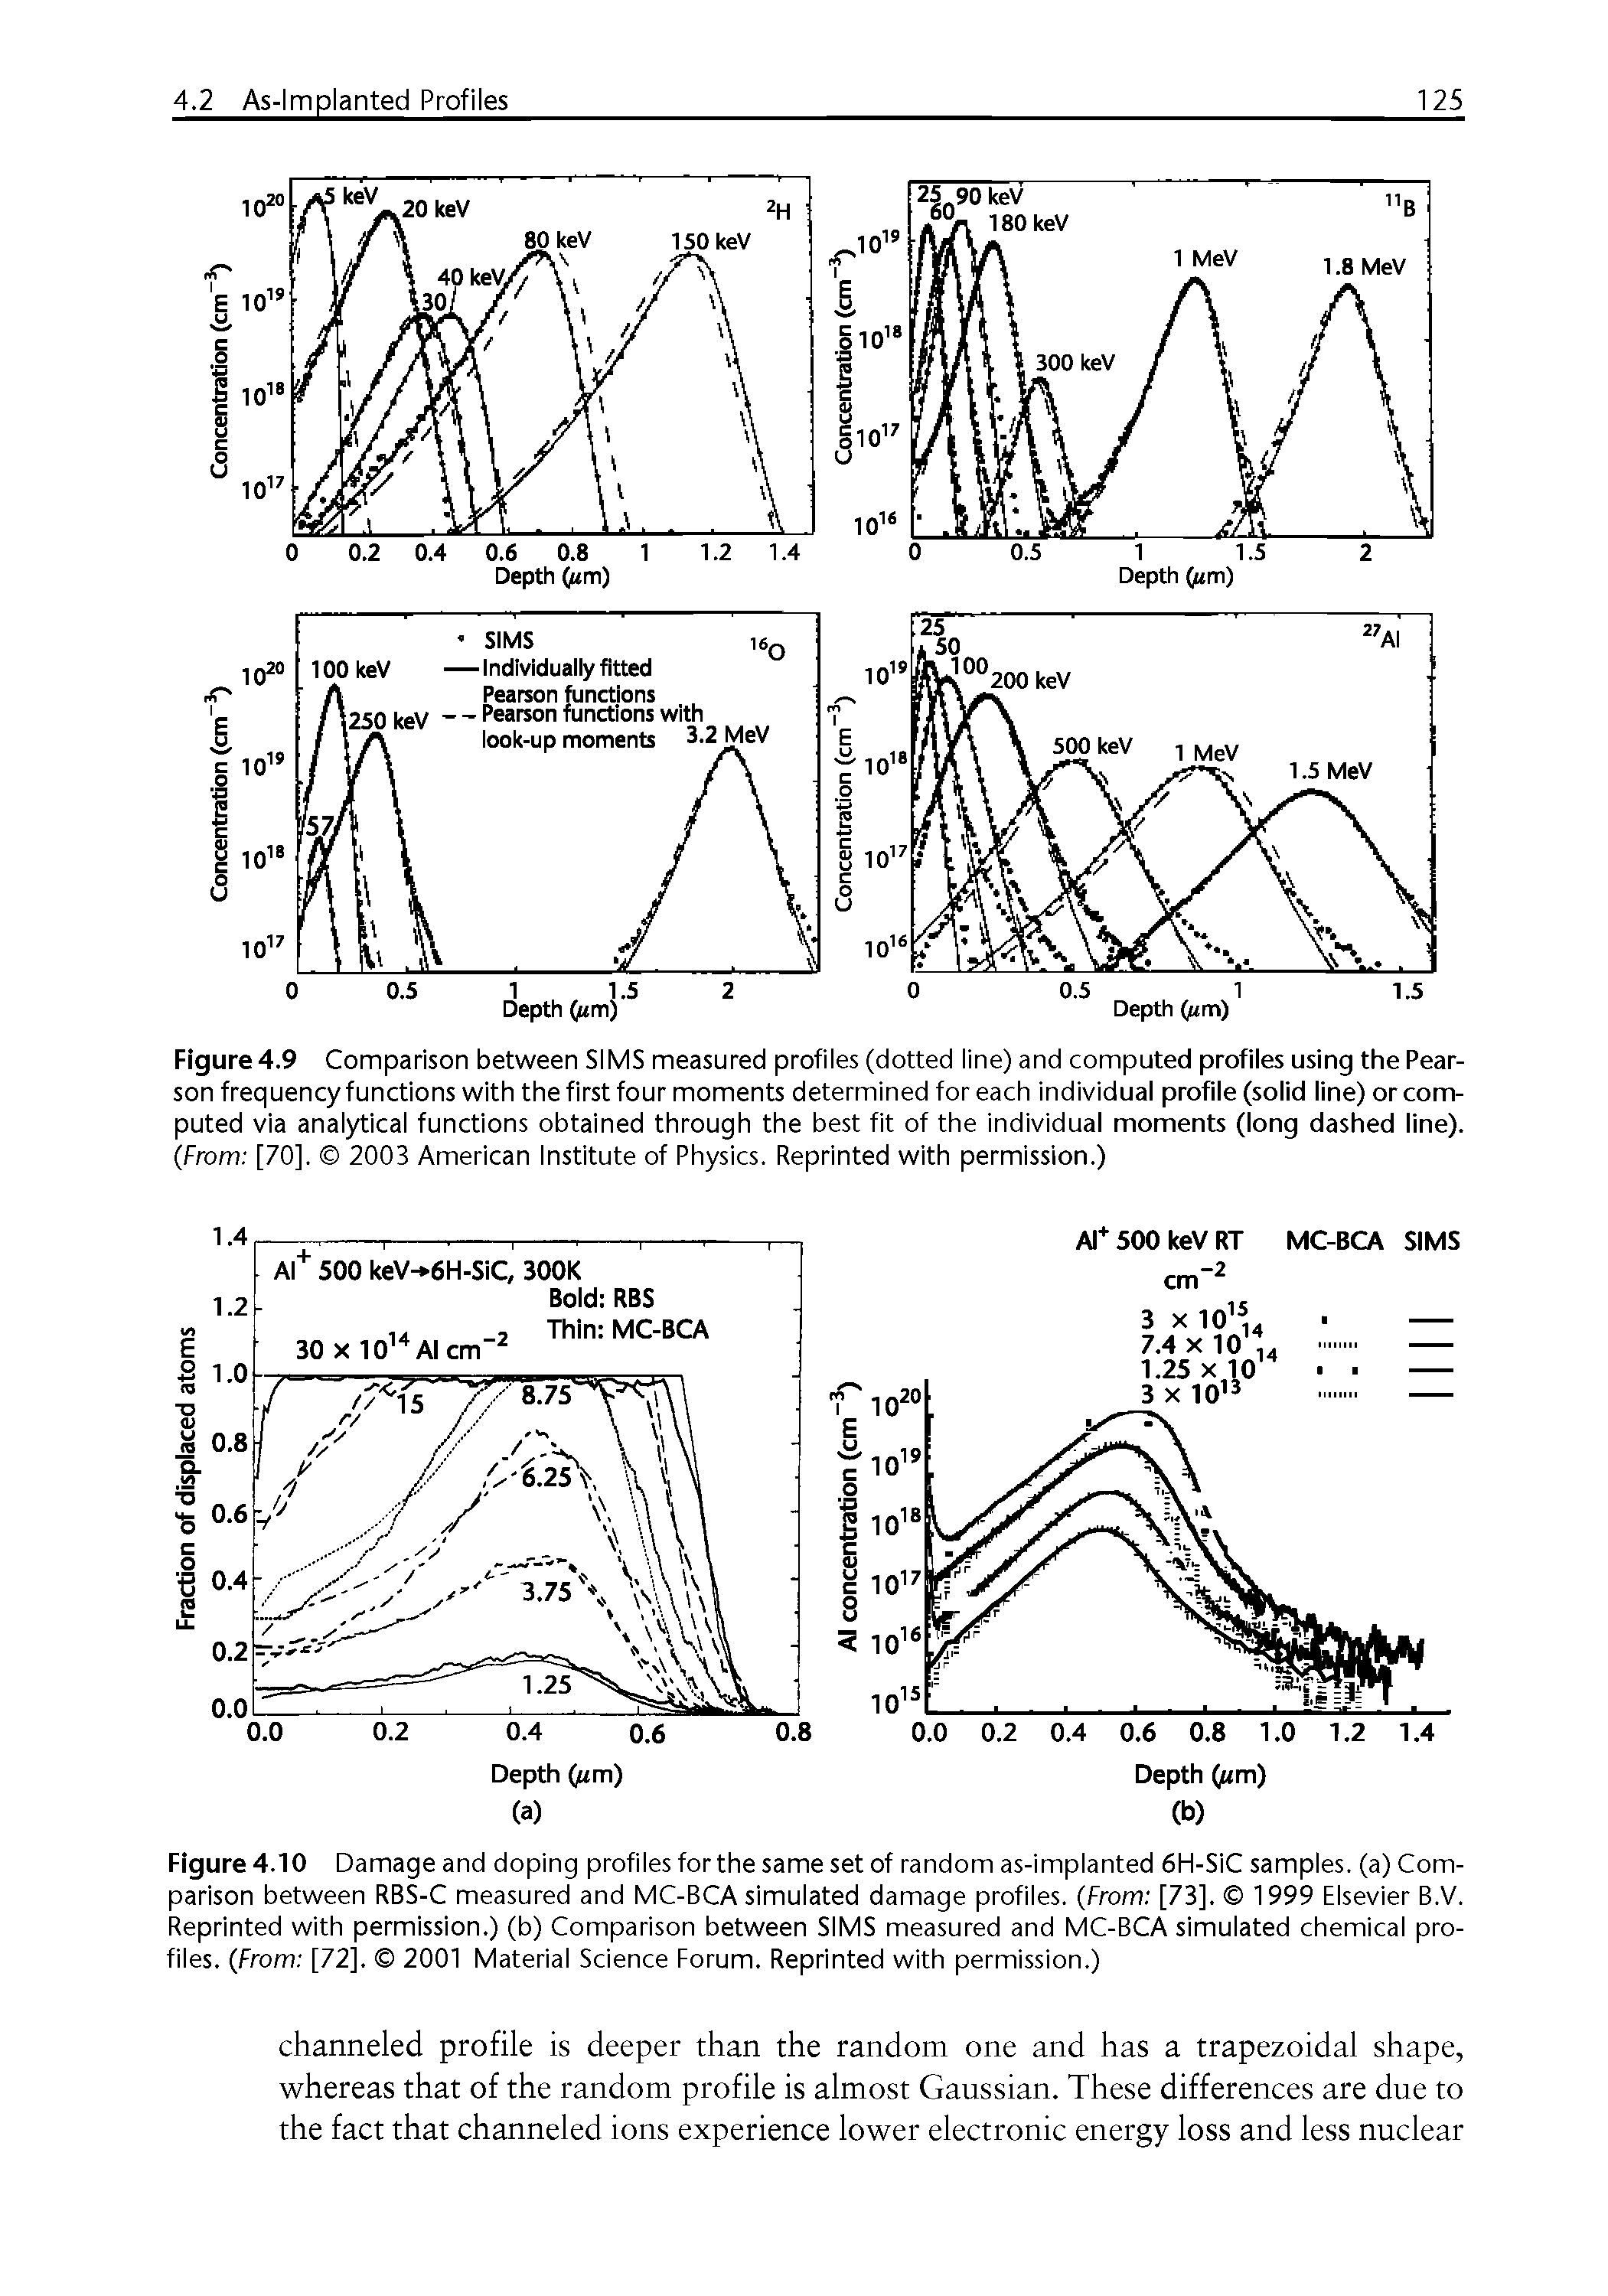 Figure 4.10 Damage and doping profiles for the same set of random as-implanted 6H-SIC samples, (a) Comparison between RBS-C measured and MC-BCA simulated damage profiles. (From [73]. 1999 Elsevier B.V. Reprinted with permission.) (b) Comparison between SIMS measured and MC-BCA simulated chemical profiles. (From [72]. 2001 Material Science Forum. Reprinted with permission.)...